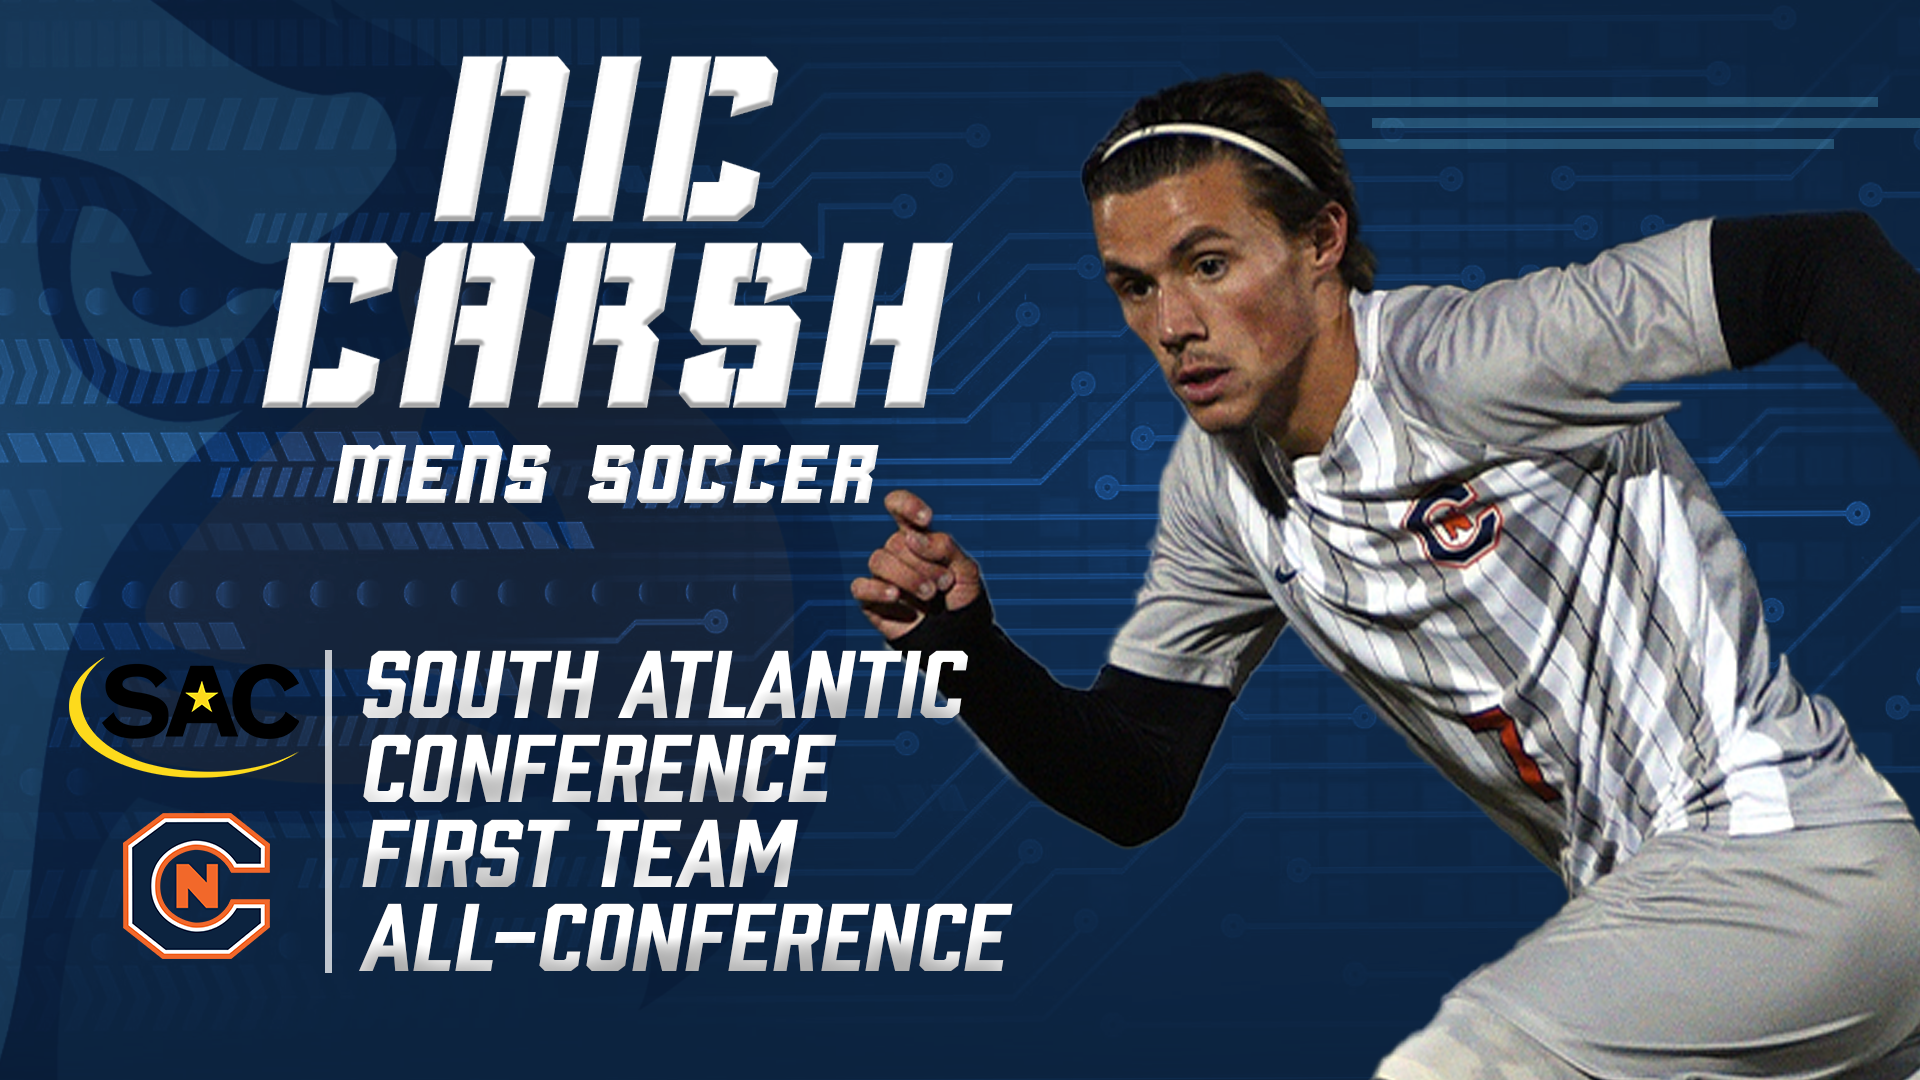 Carsh headlines men's soccer's all conference selections